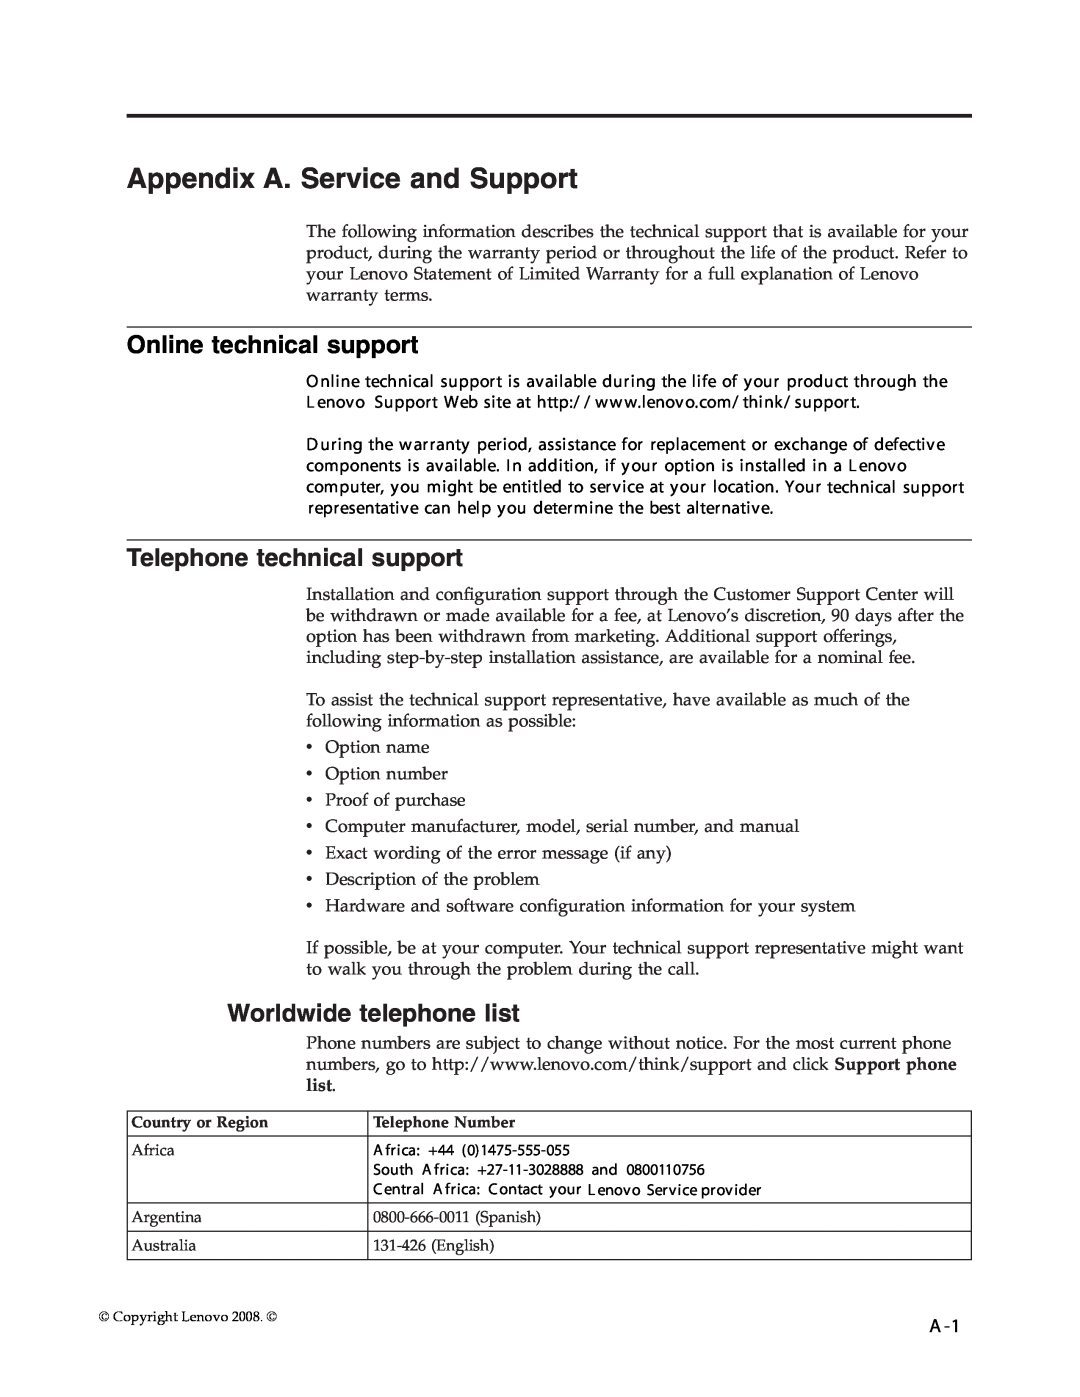 Lenovo 4415-AB1 manual Appendix A. Service and Support, Online technical support, Telephone technical support 